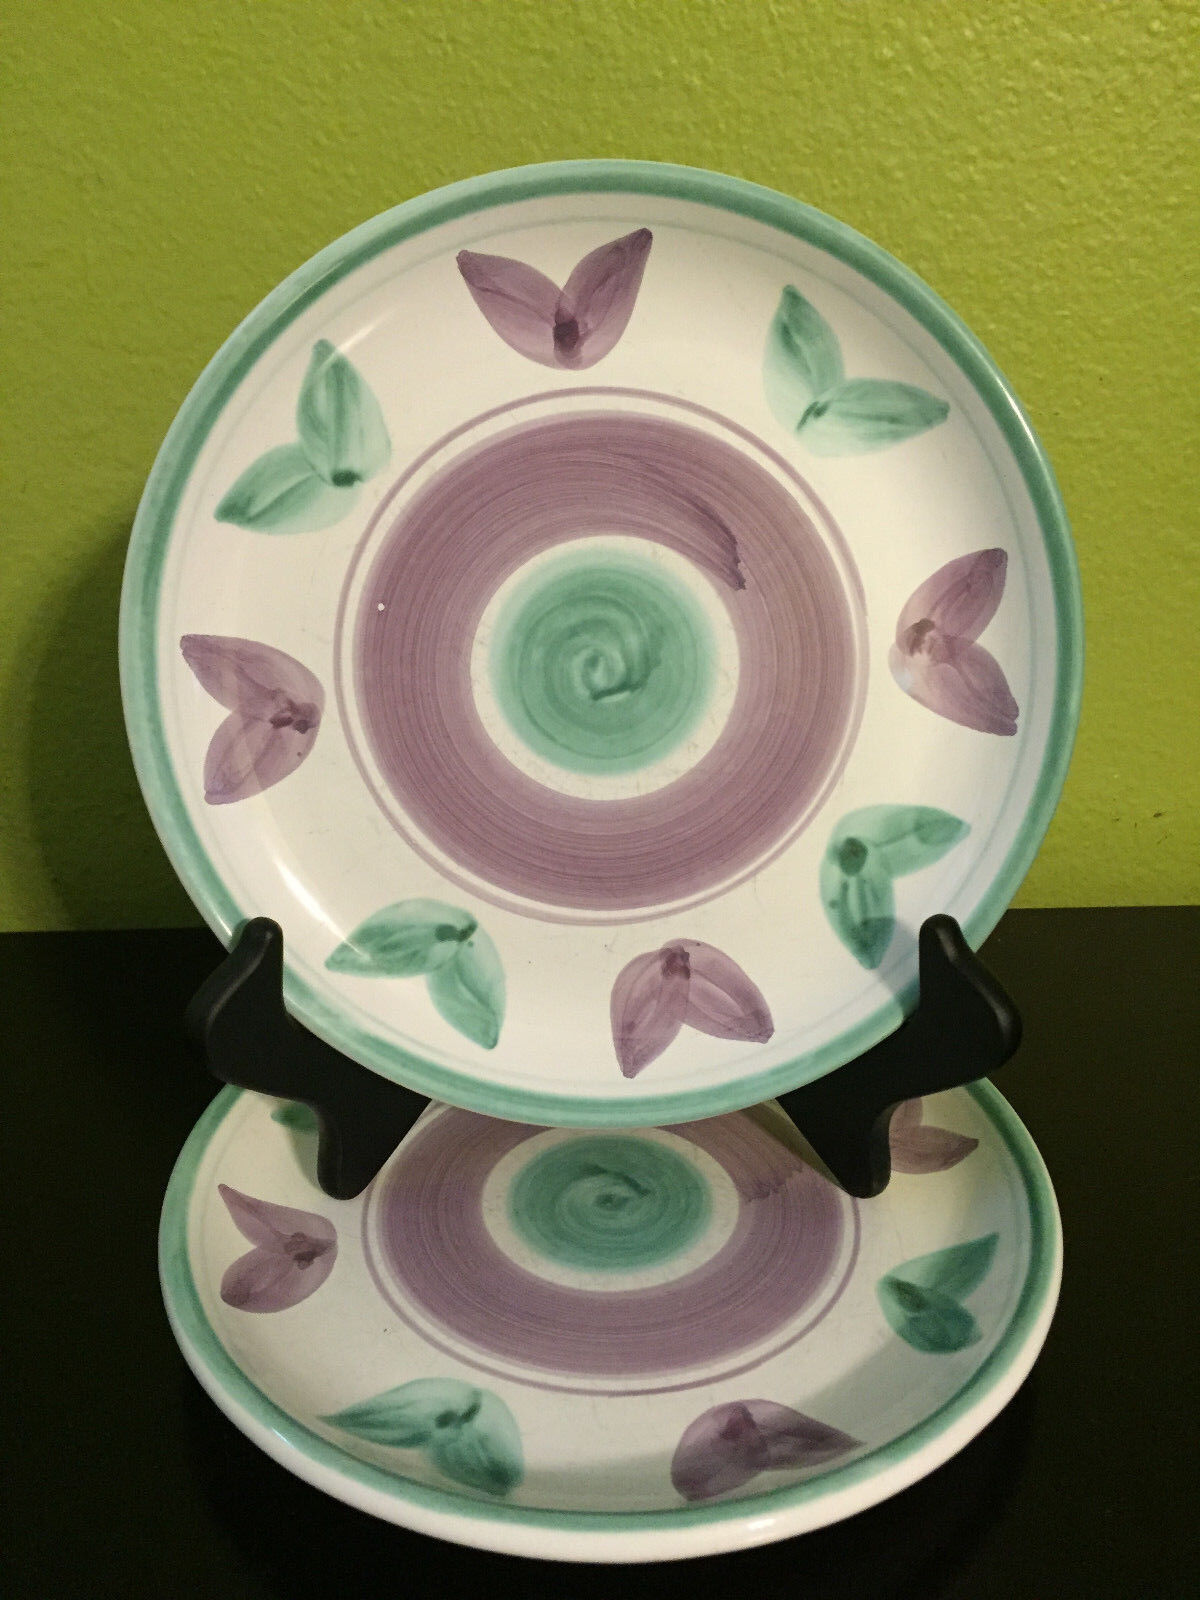 1 Caleca Violetta Hand Painted in Italy-Purple/Green Salad Plate(s) Pottery